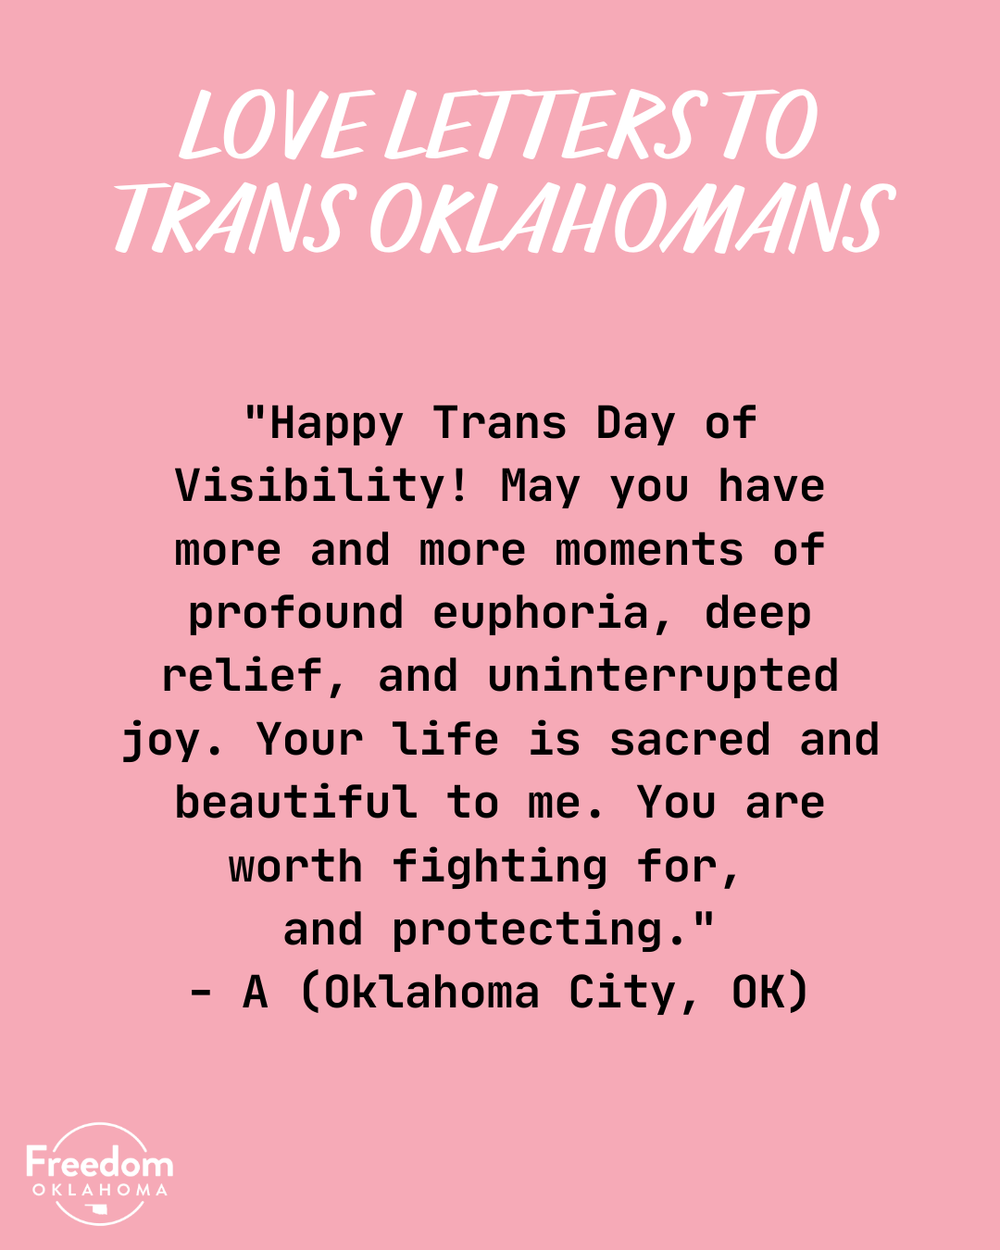  "Love Letters to Trans Oklahomans" and the text of a love letter on a pink background. "Happy Trans Day of Visibility! May you have more and more moments of profound euphoria, deep relief, and uninterrupted joy. Your life is sacred and beautiful to 